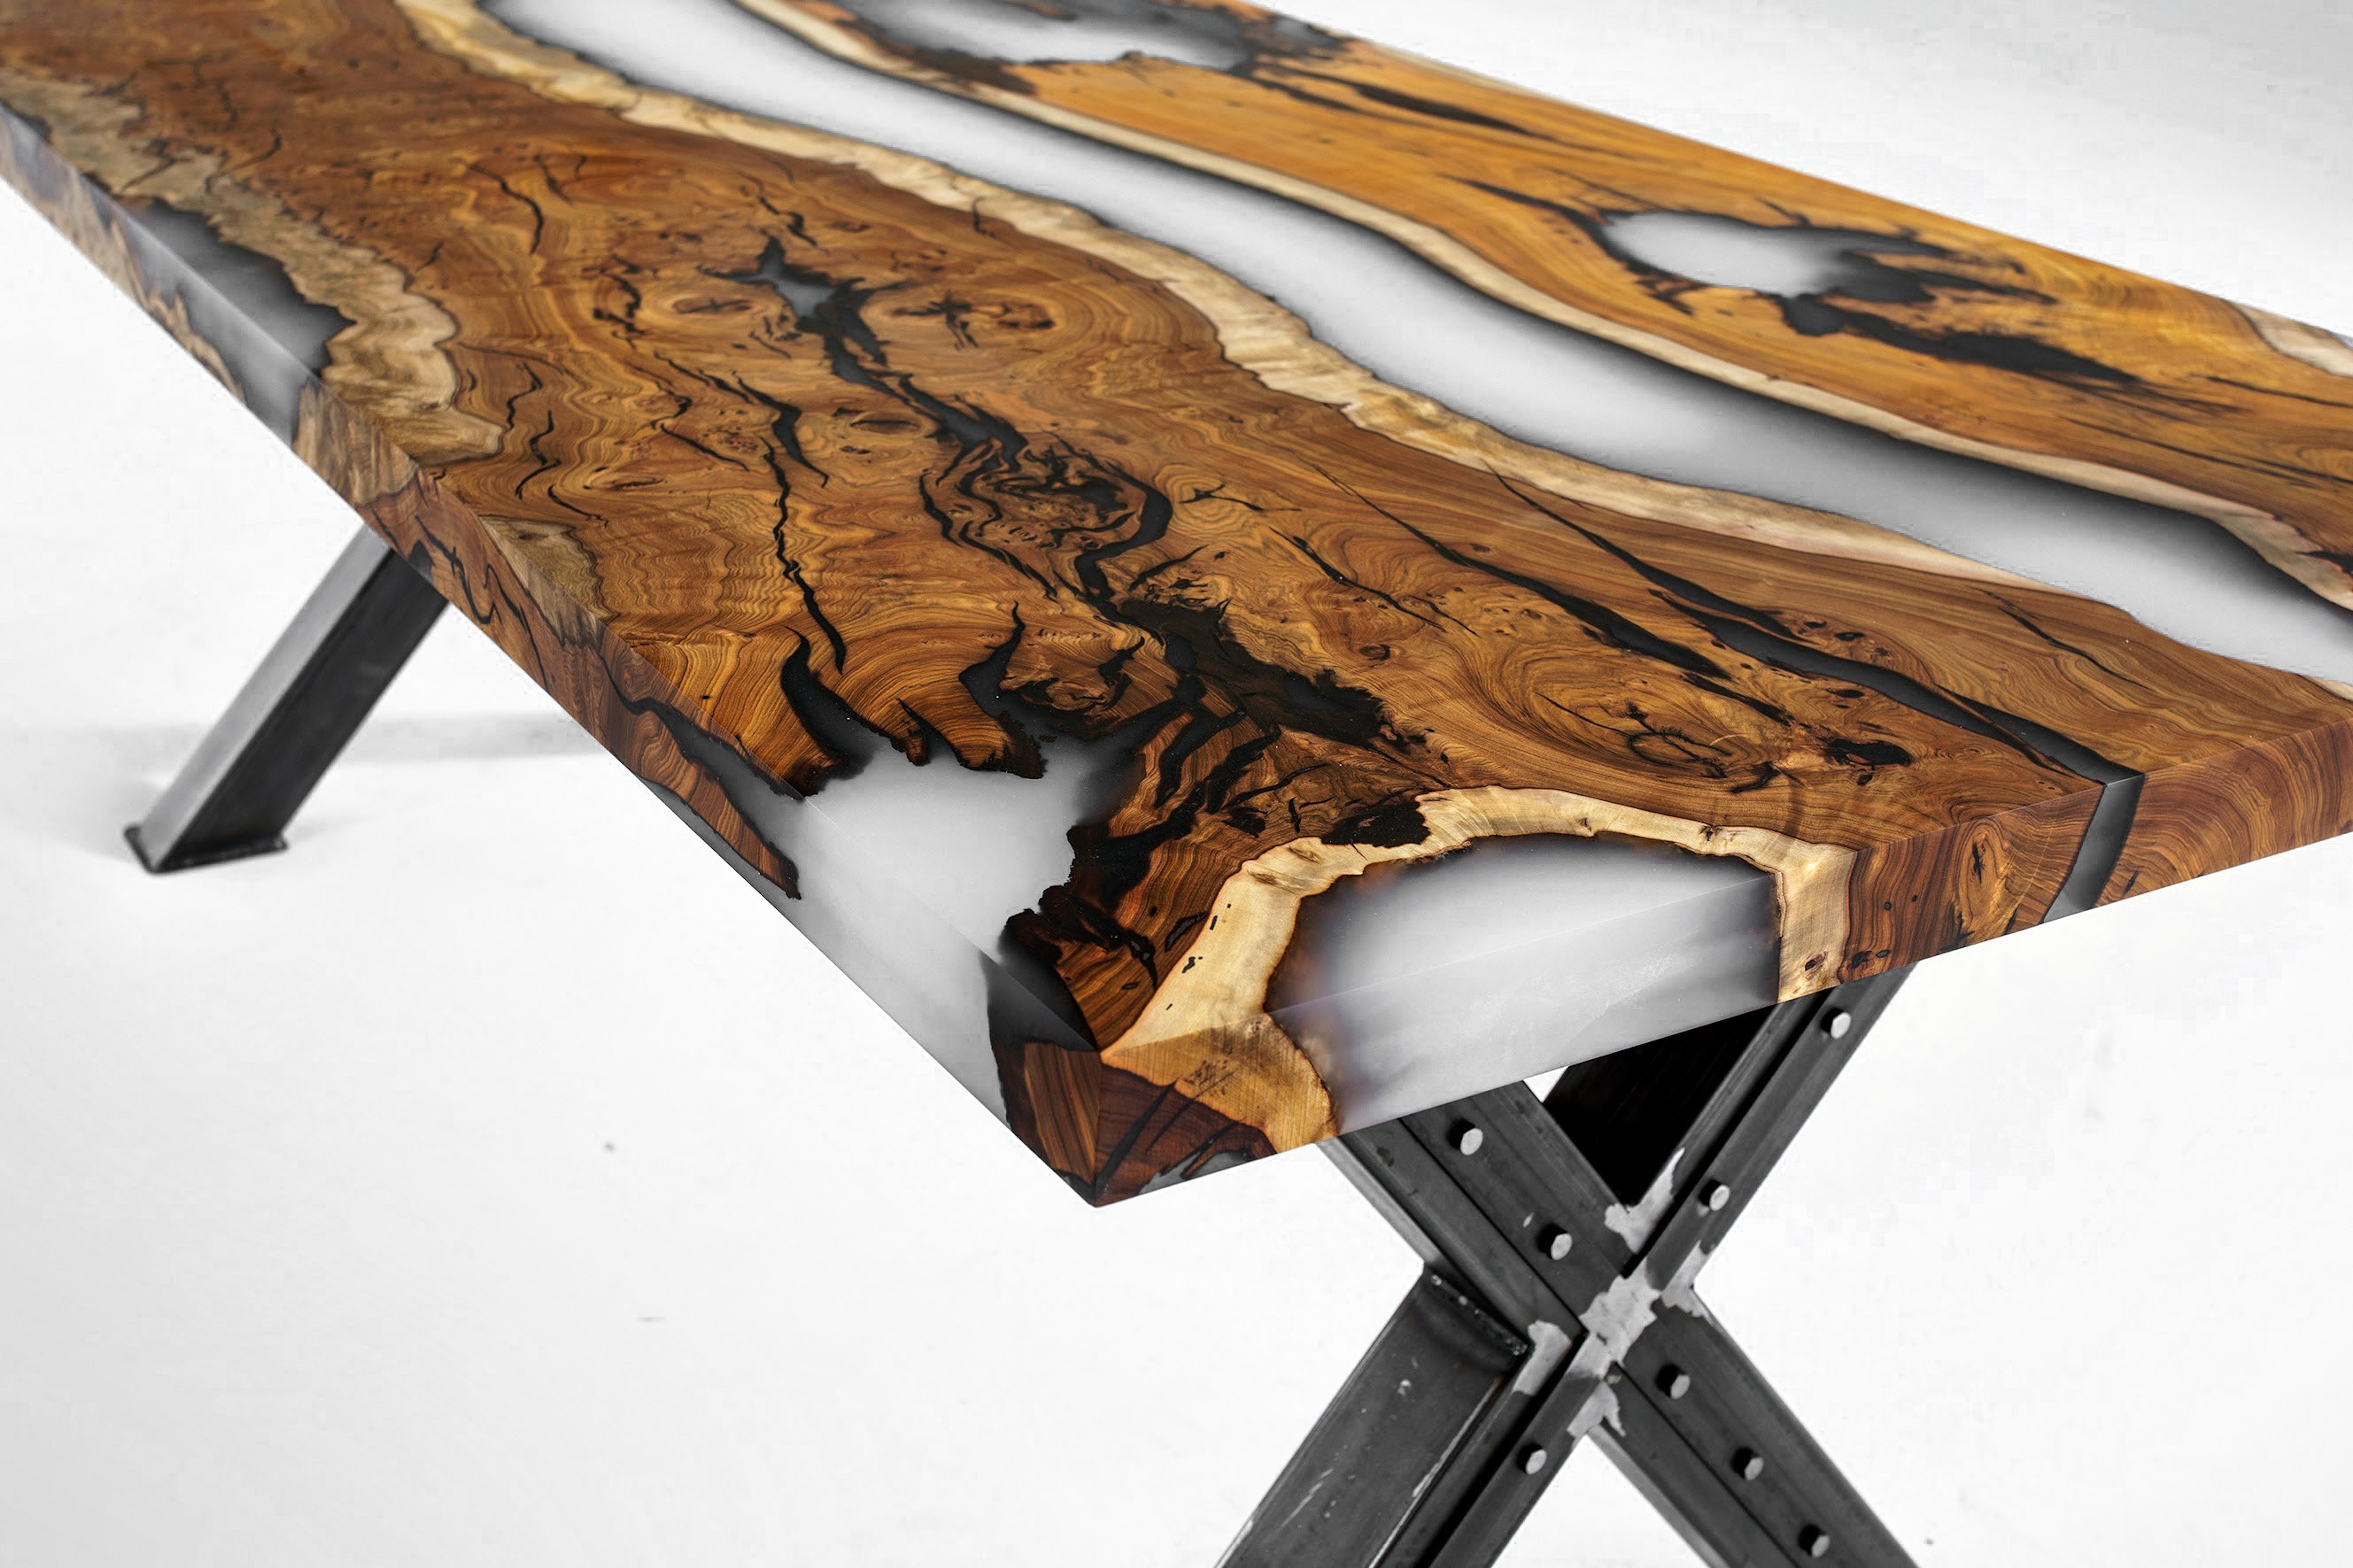 HACKBERRY WOOD ICE RESIN DINING TABLE

This epoxy table emerges as a unique work of art, inspired by nature's beauty. 

The epoxy table stands out not only for its design but also its durability. Thanks to its epoxy coating, it is highly resistant